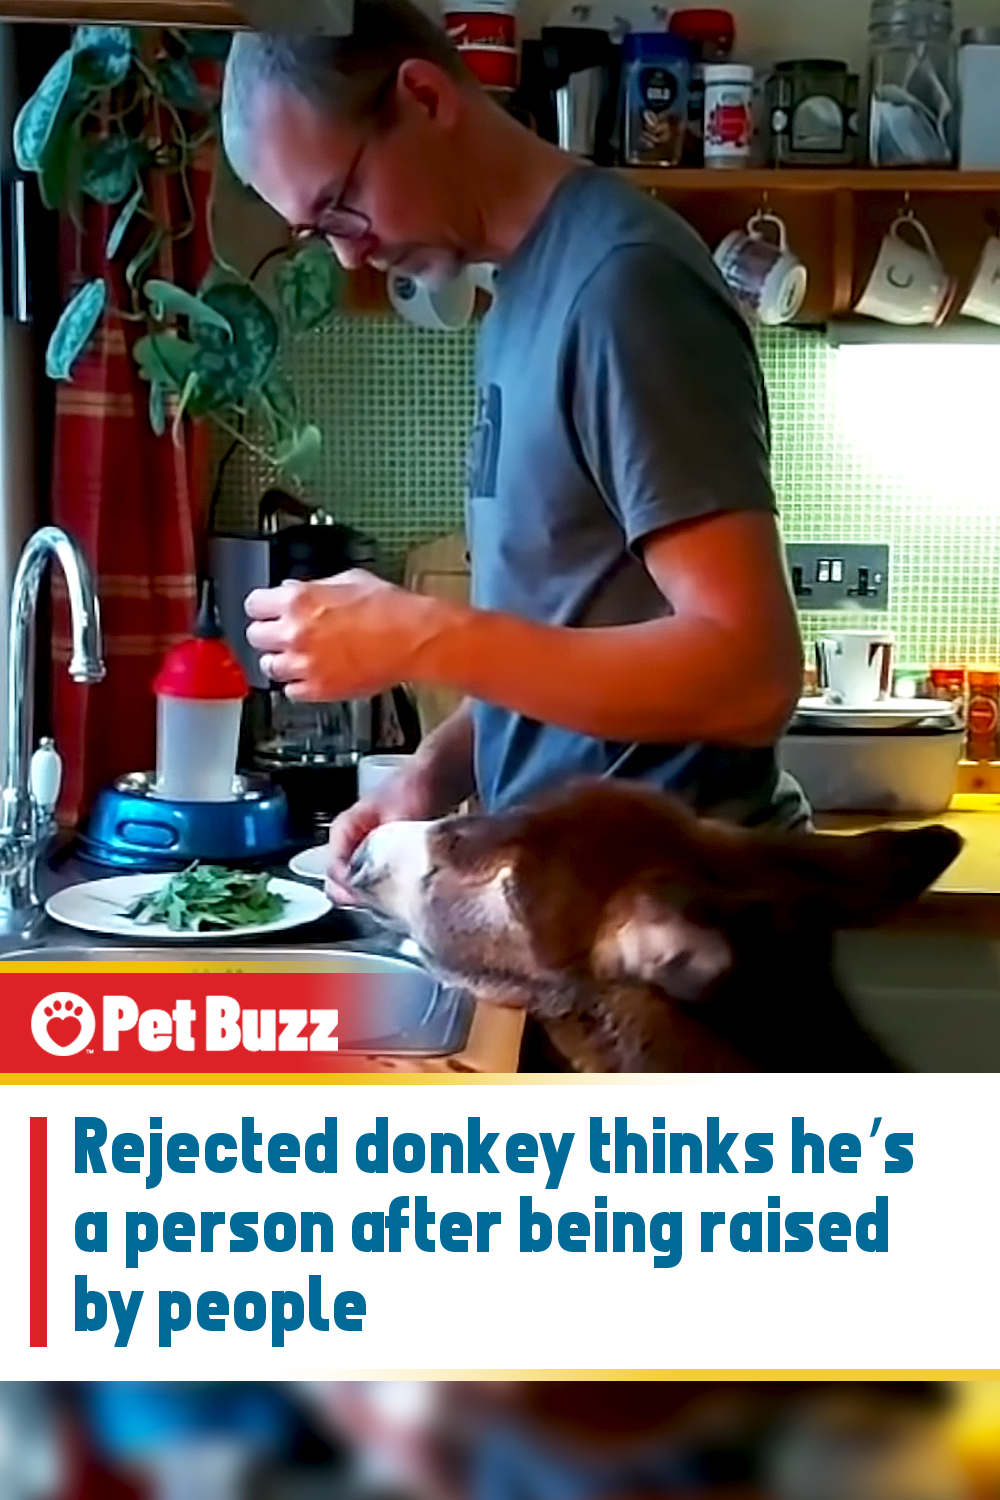 Rejected donkey thinks he’s a person after being raised by people